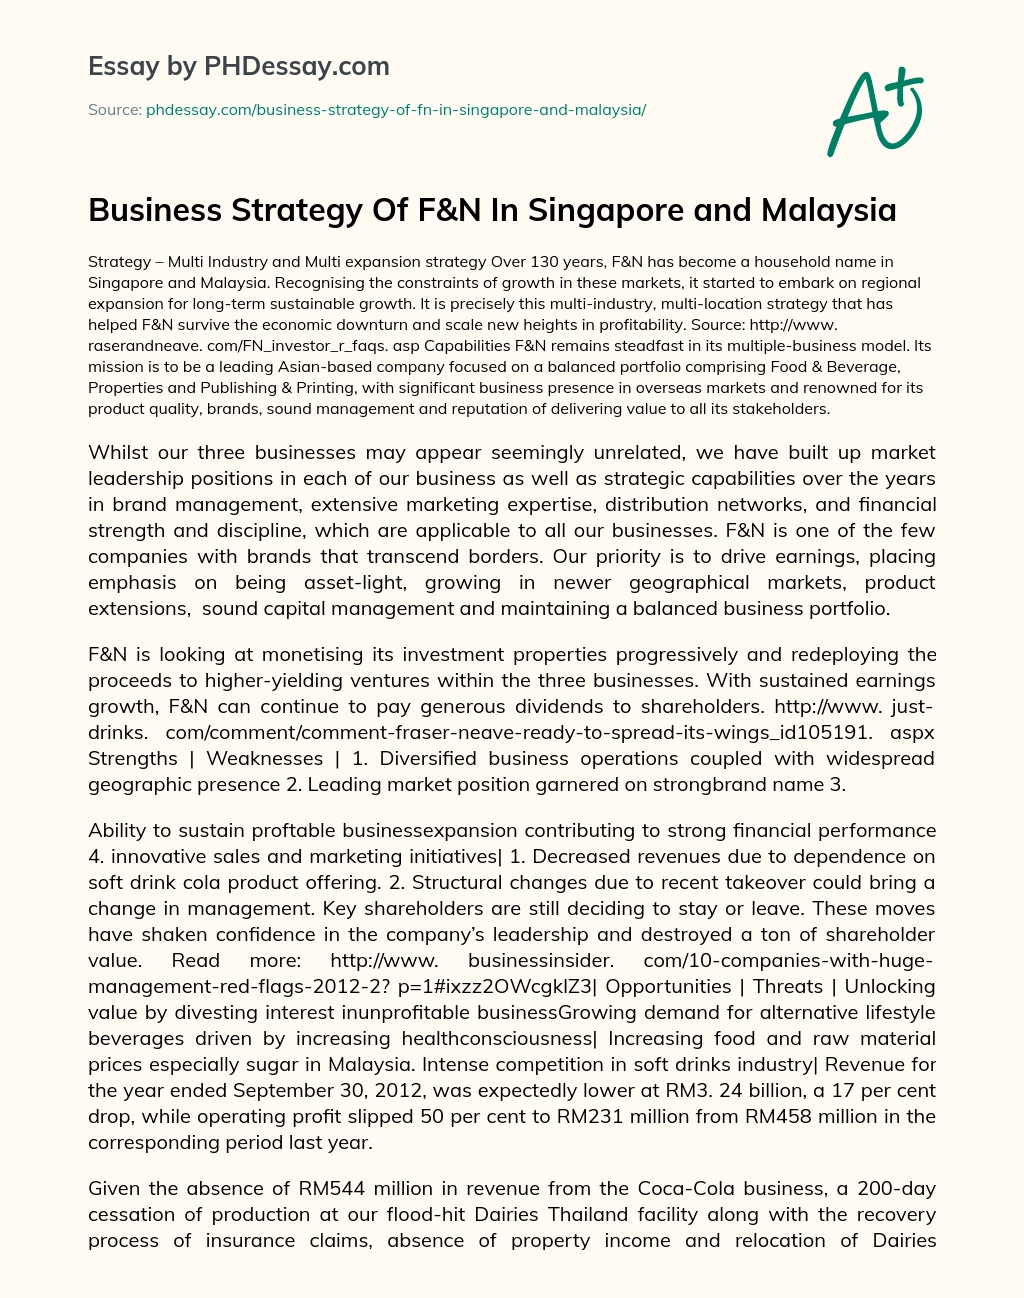 Business Strategy Of F&N In Singapore and Malaysia essay